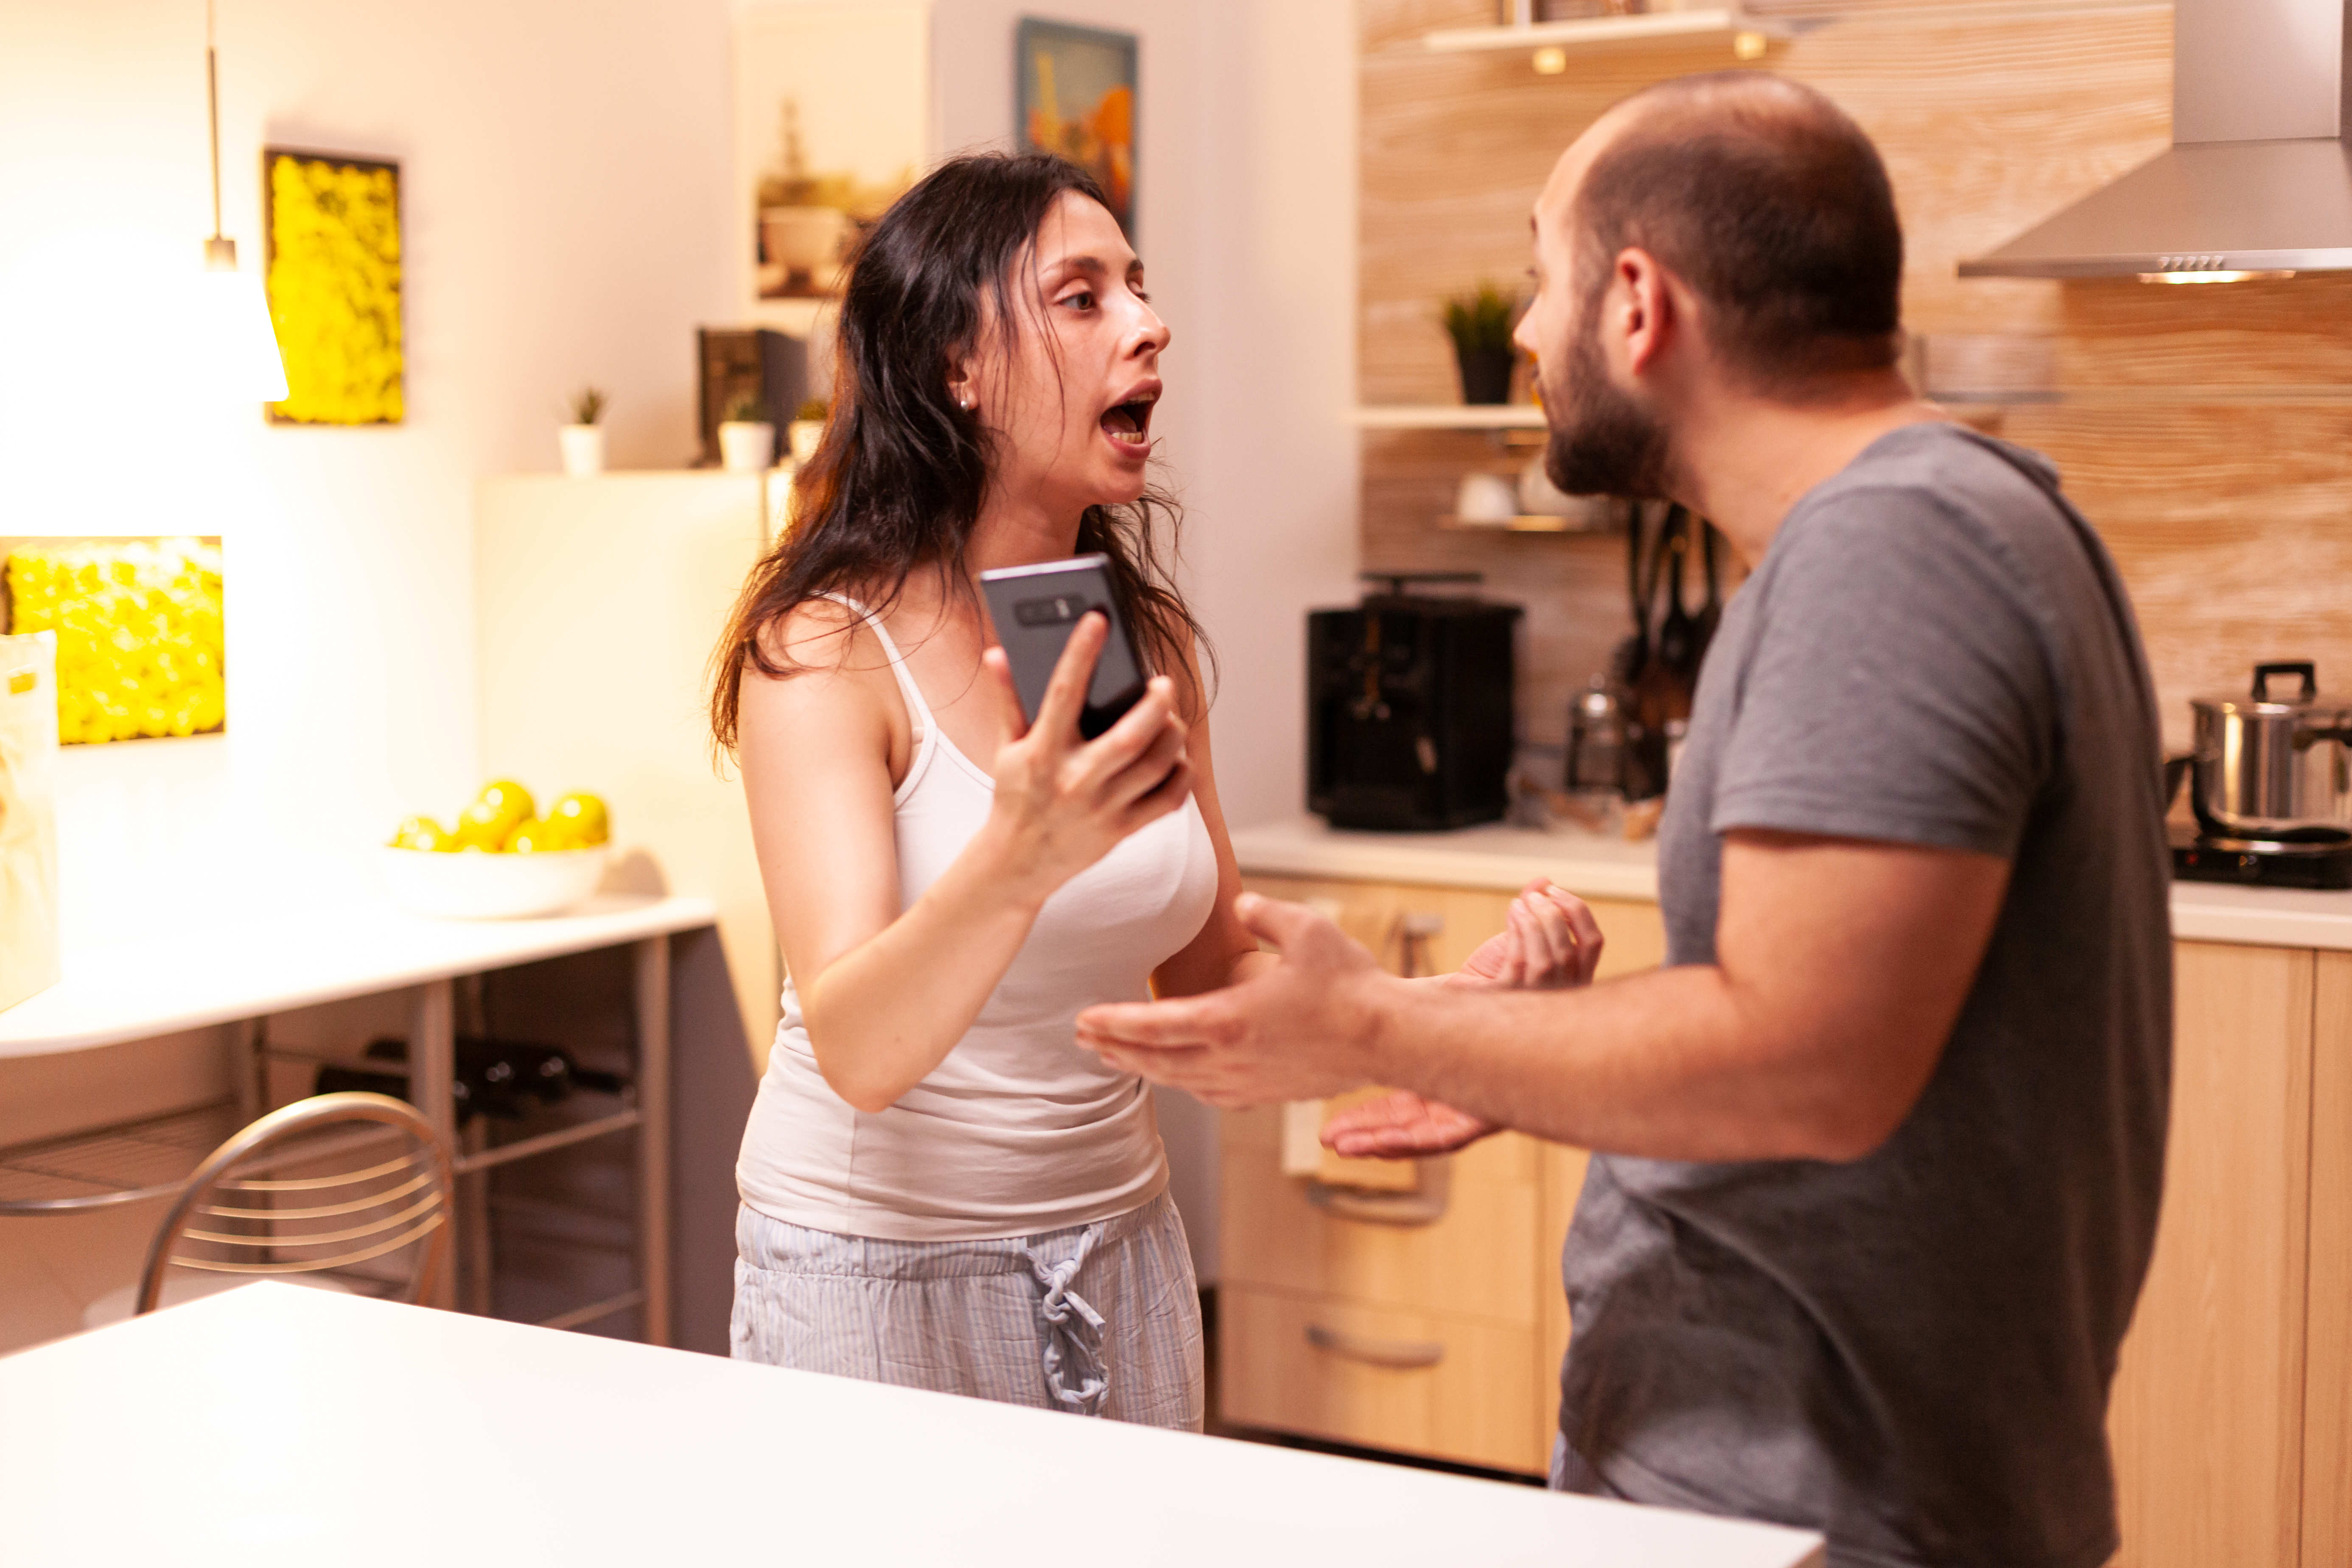 Wife angry with husband. | Source: Shutterstock